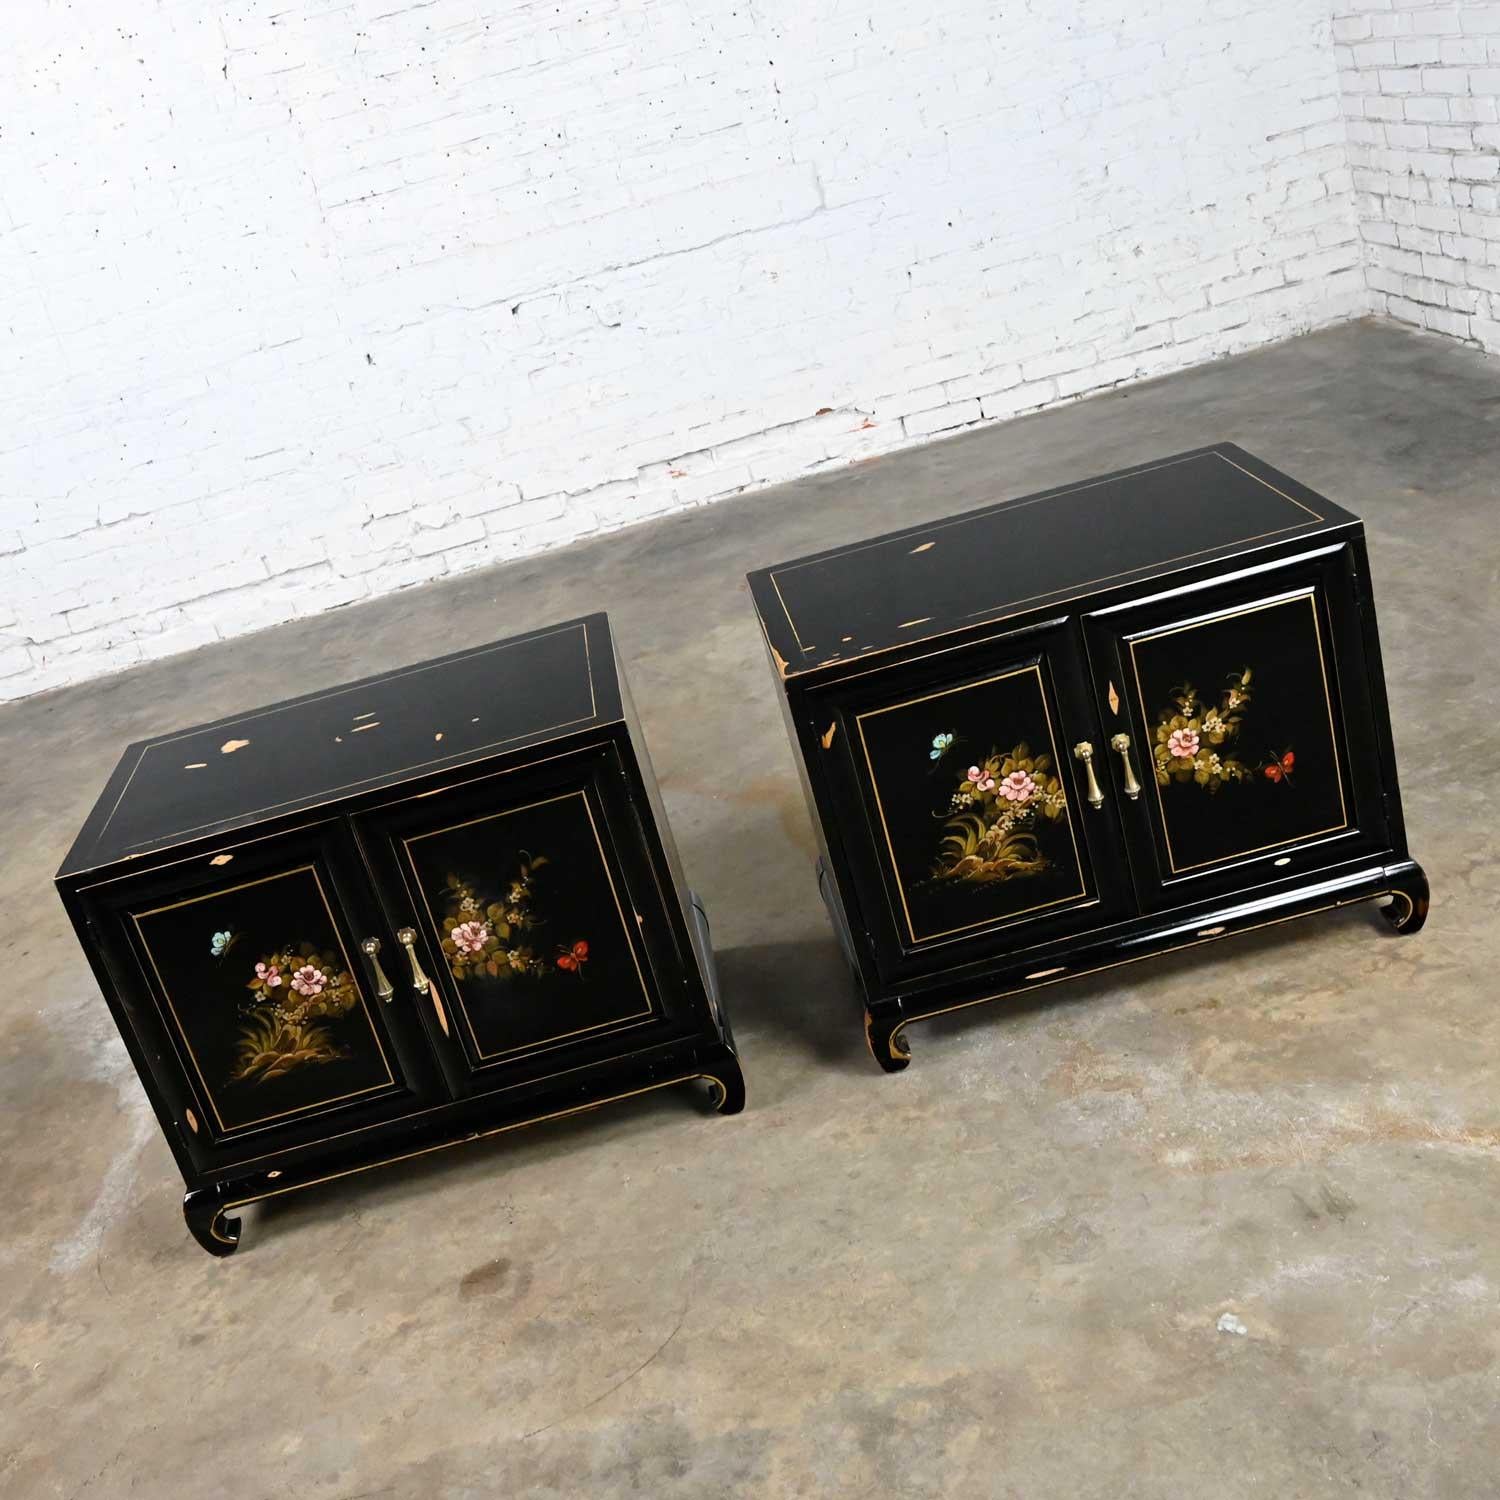 Gorgeous Union National Chinoiserie chow leg Ming style pair of nightstands black with floral design signed Dimas, distressed patina painted finish, and teardrop brass pulls. Beautiful condition, keeping in mind that these are vintage and not new so